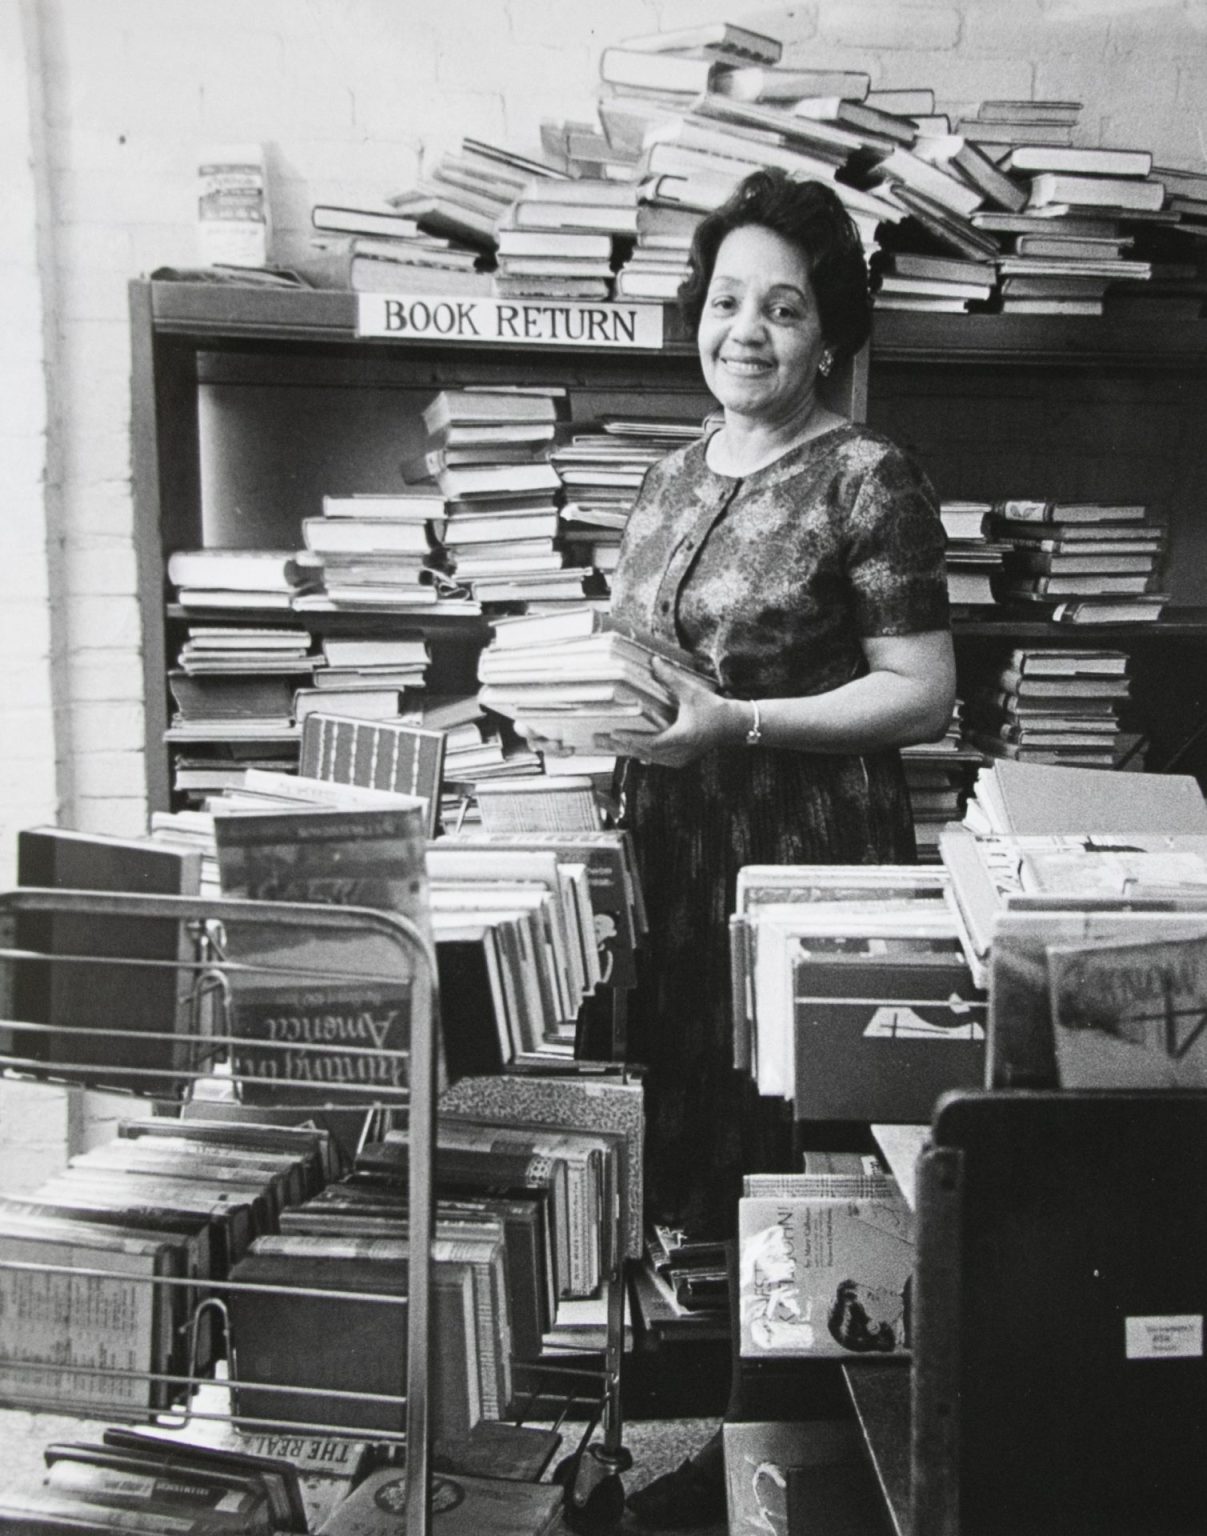 A smiling woman holds books in front of shelves of books labeled "book returns" in this black and white photo.